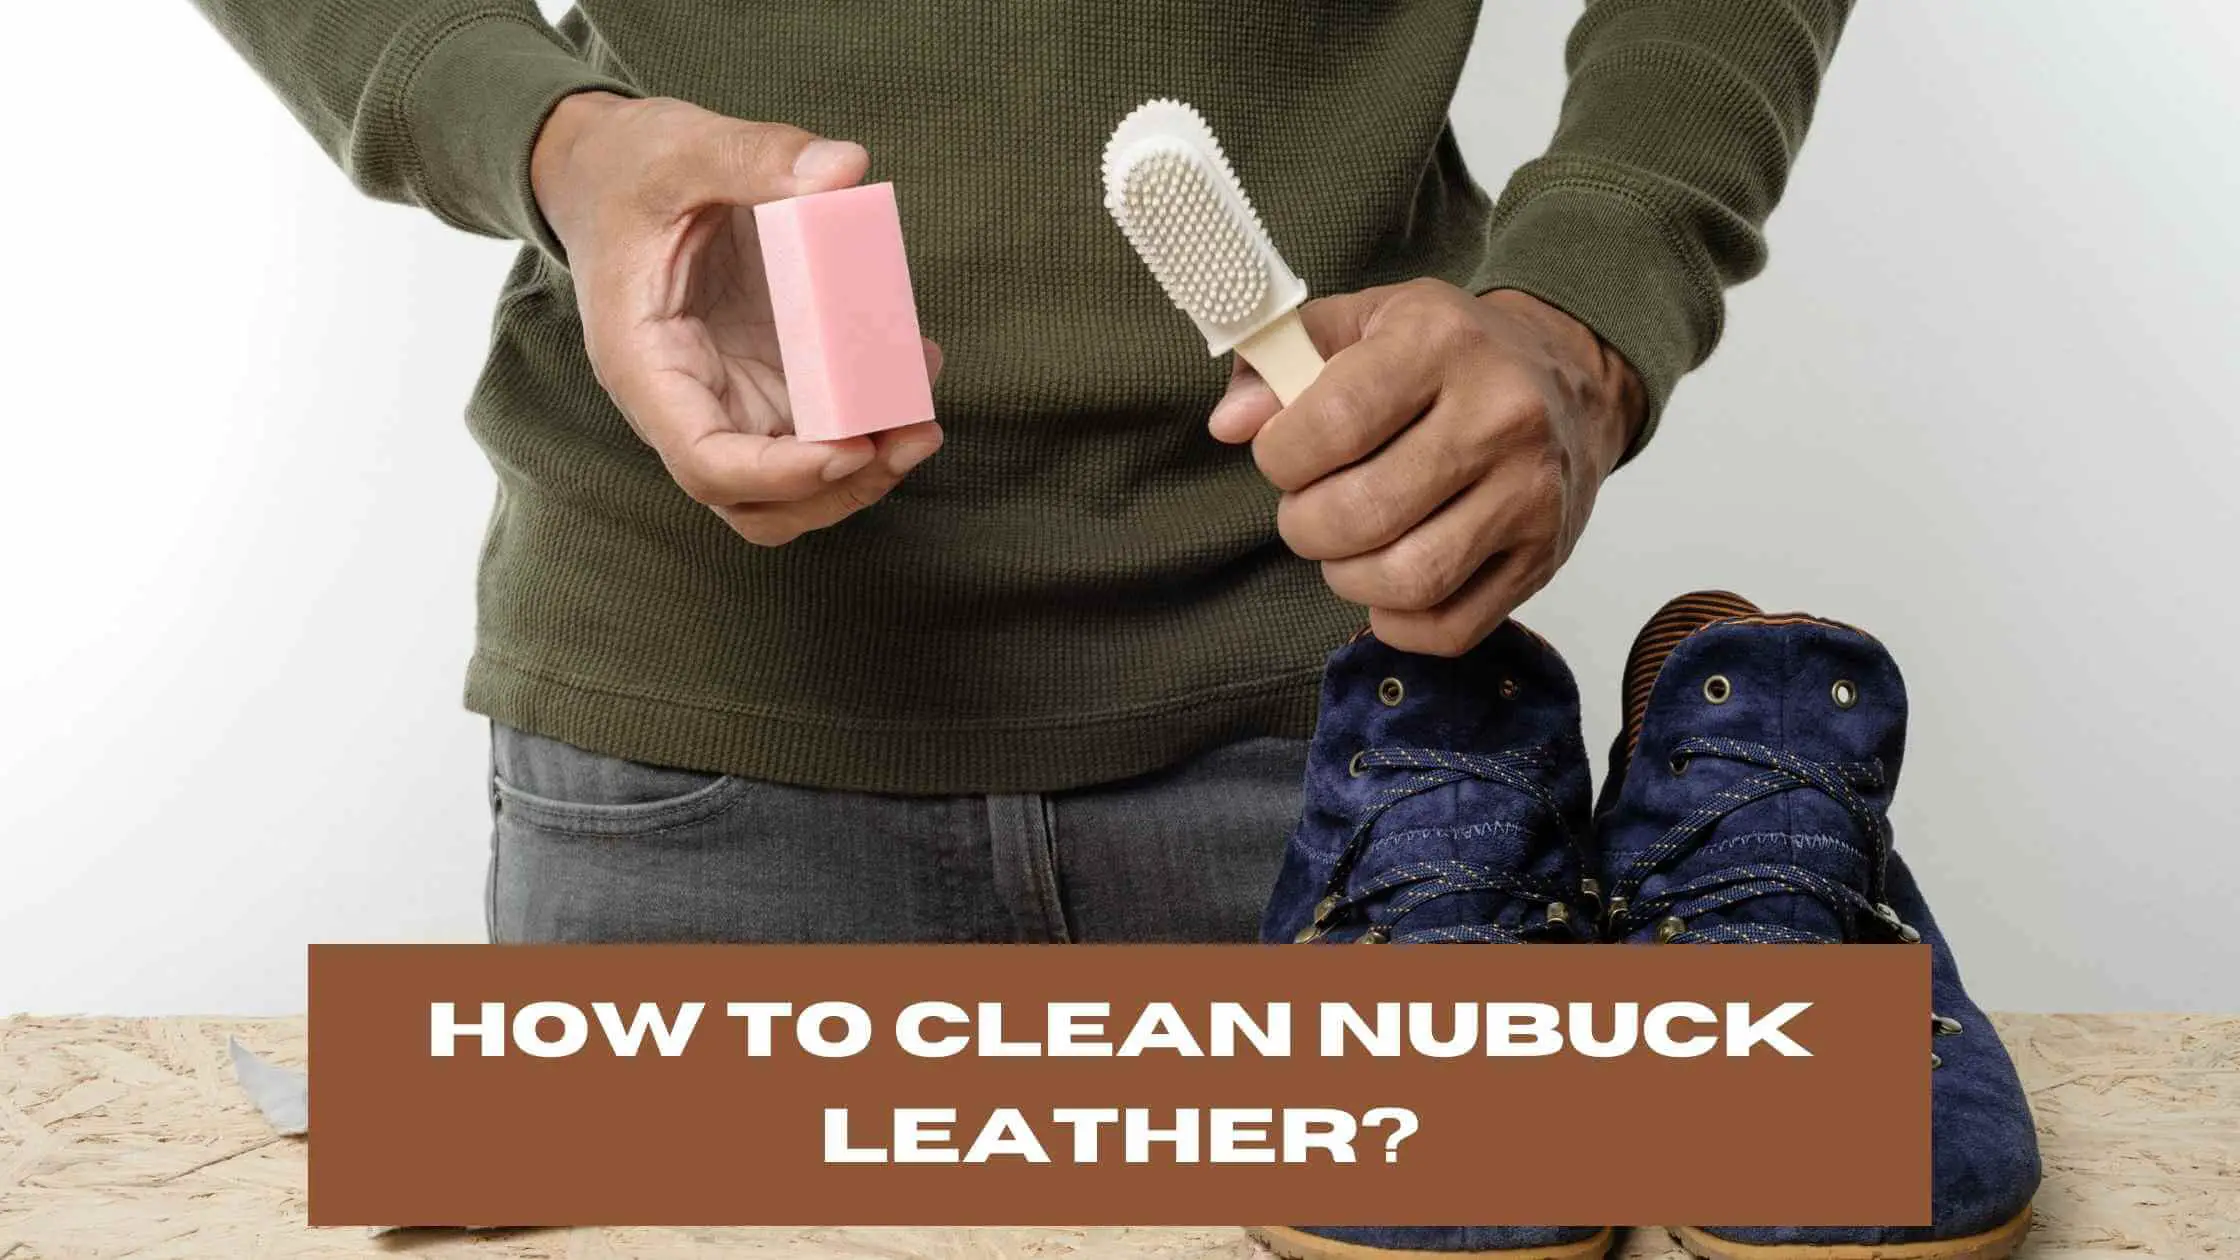 Easy and Effective Ways to Clean Nubuck Leather - Step-by-Step Guide 